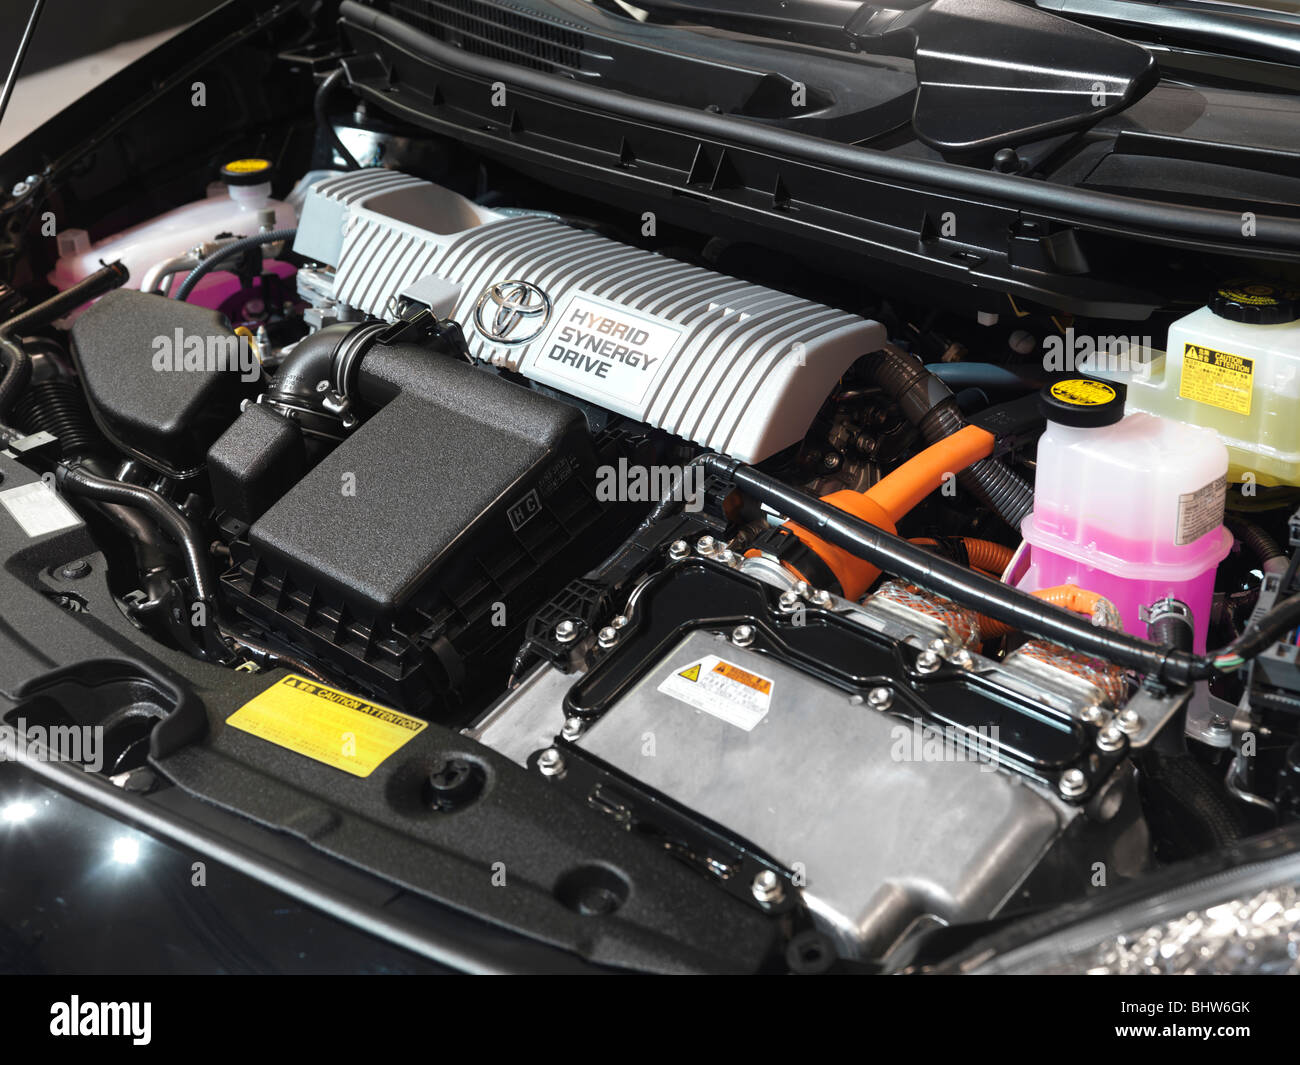 2010 Toyota Prius Hybrid Synergy Drive Engine Banque D'Images